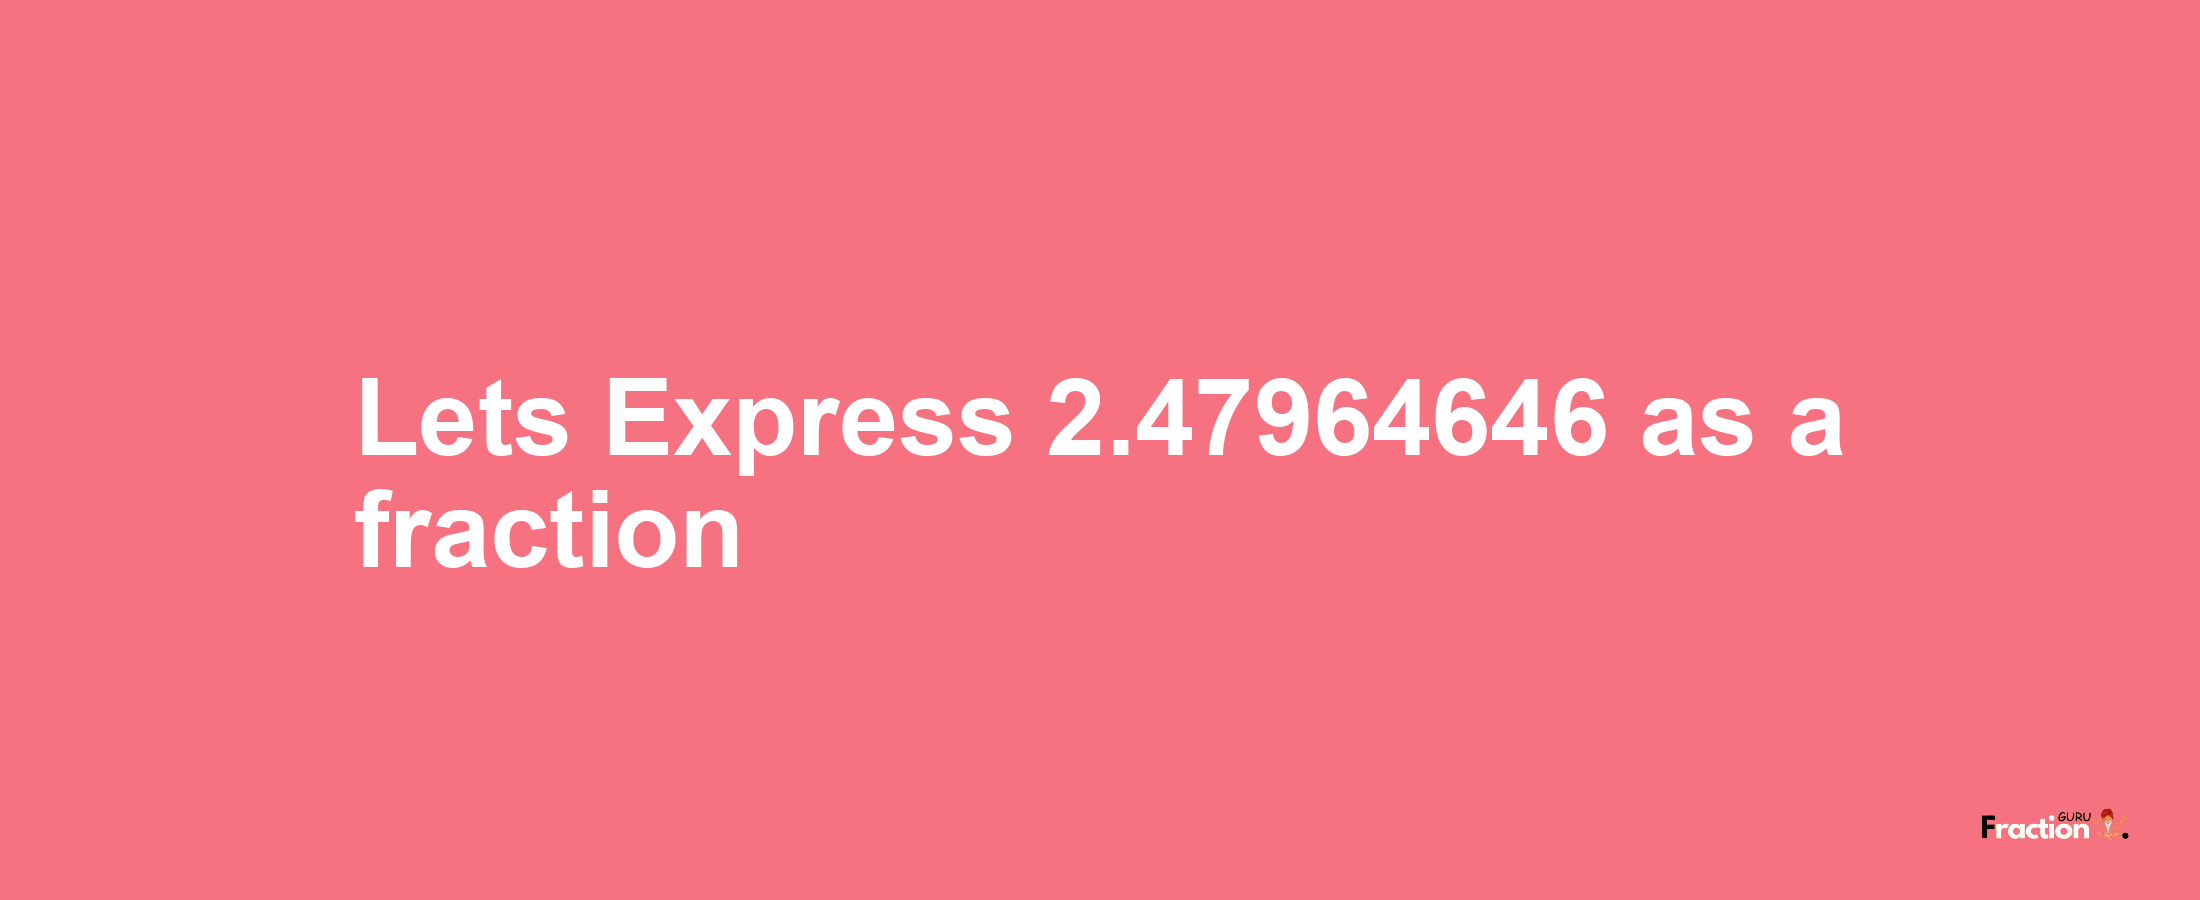 Lets Express 2.47964646 as afraction